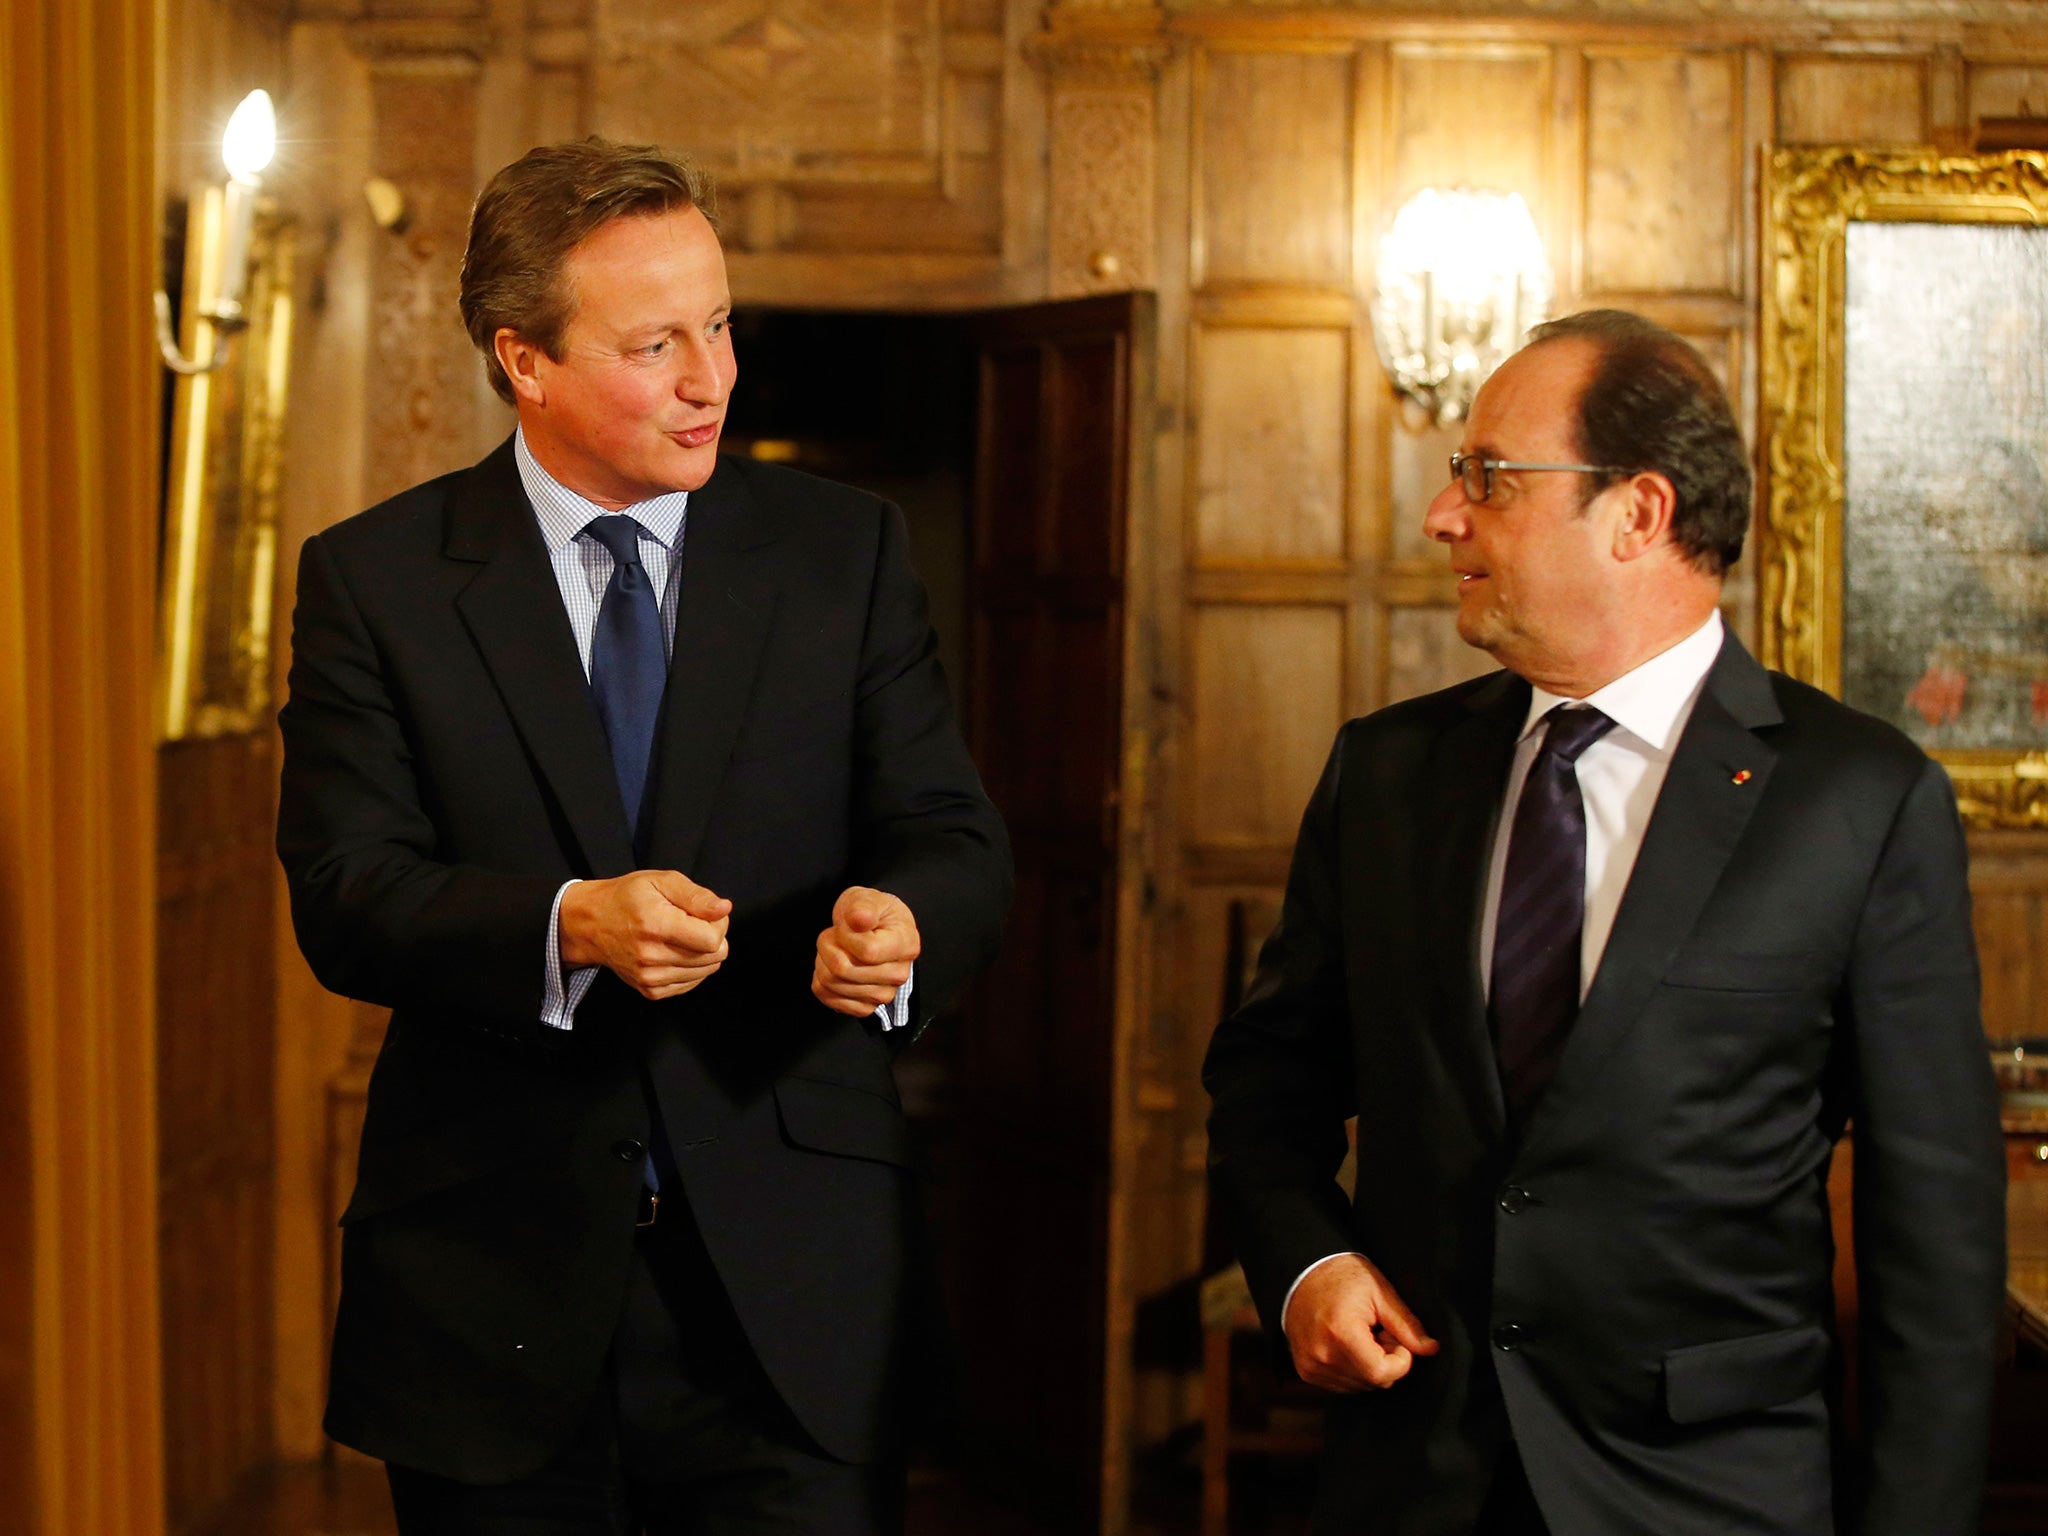 Cameron 's counterpart Francois Hollande has overseen French airstrikes